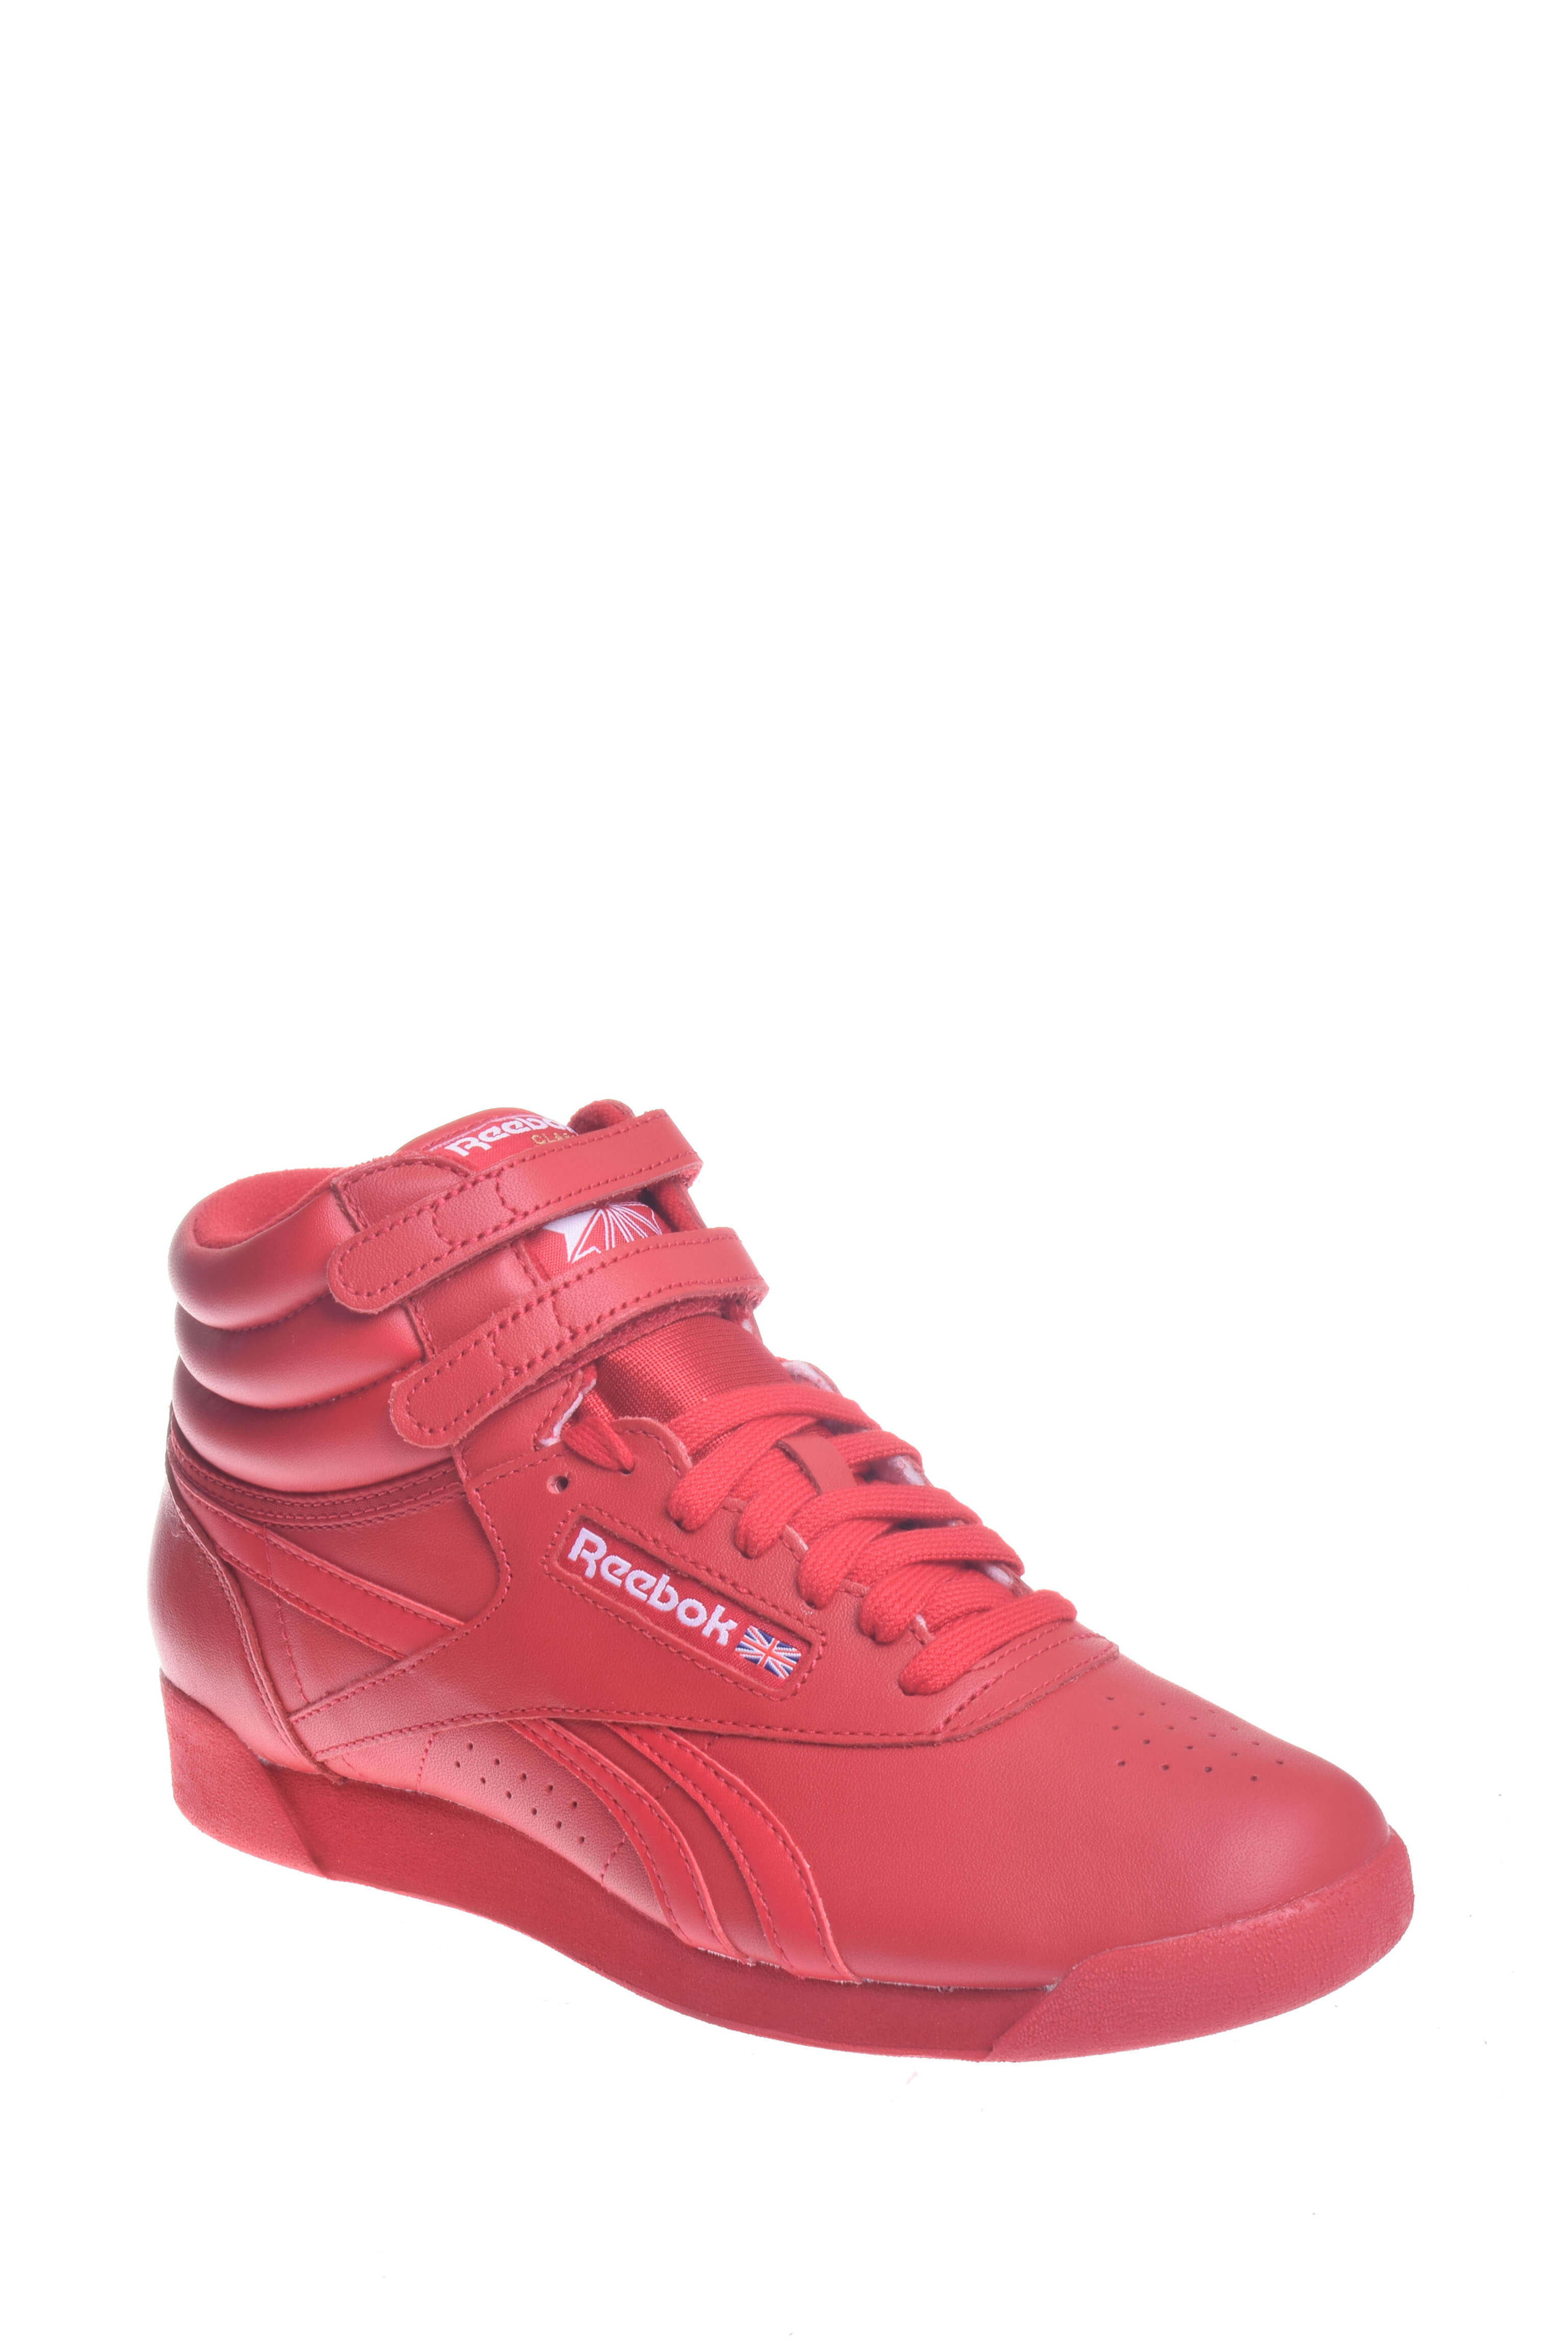 reebok freestyle red